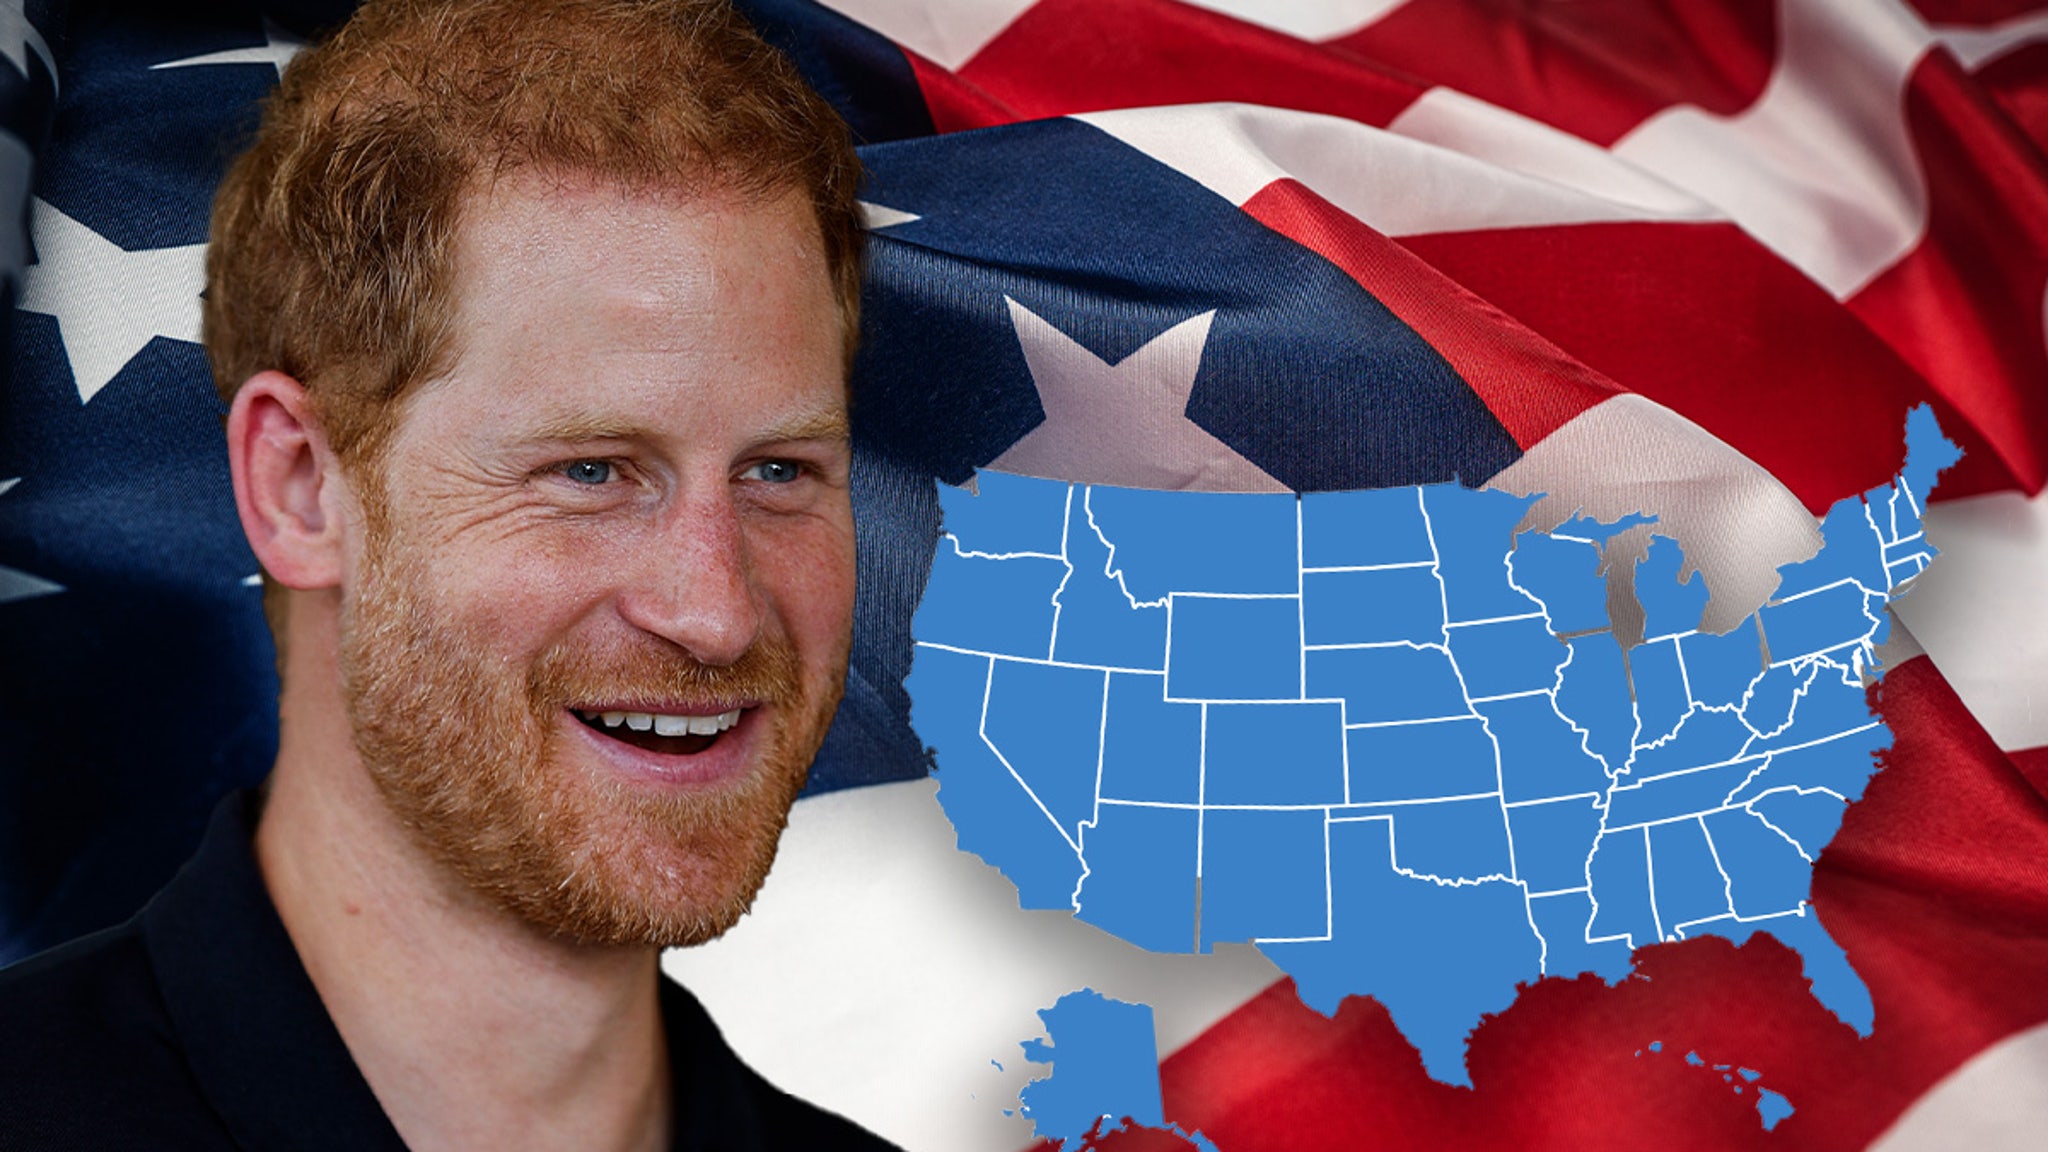 Prince Harry Officially Swaps Country of Residence from UK to U.S.